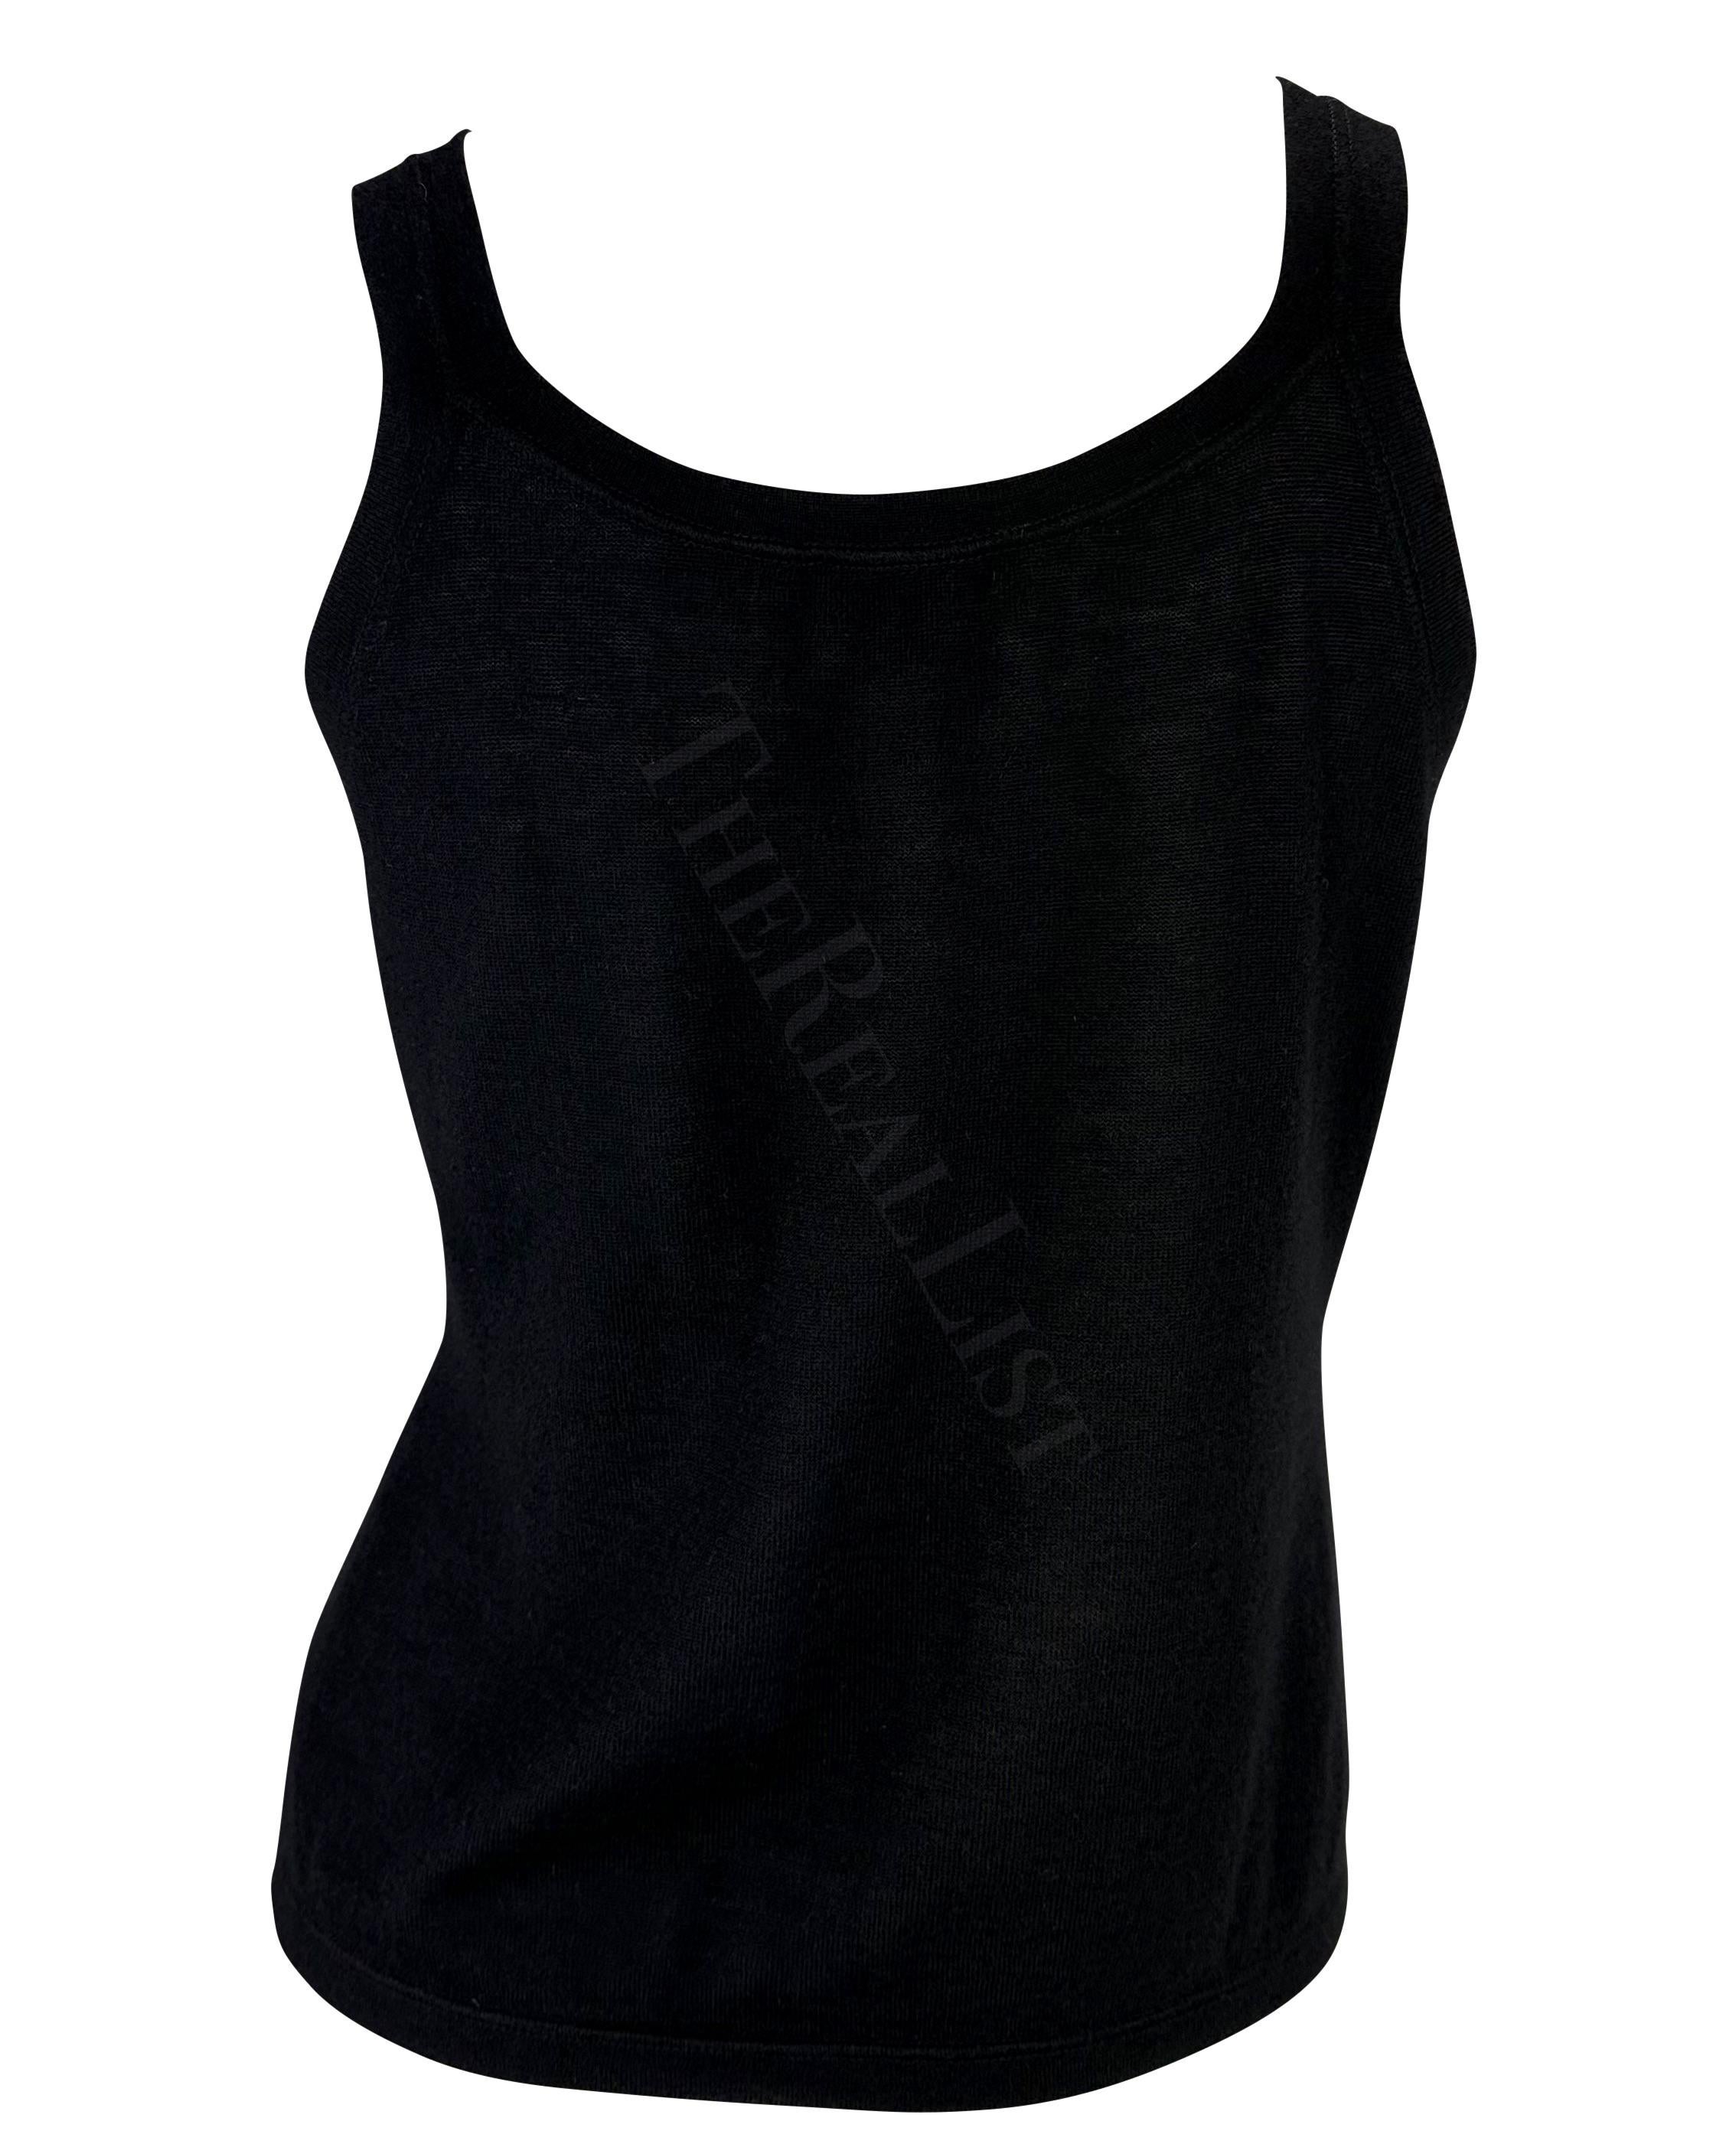 F/W 1997 Gucci by Tom Ford Runway Cashmere Black Stretch Tank Top  For Sale 1